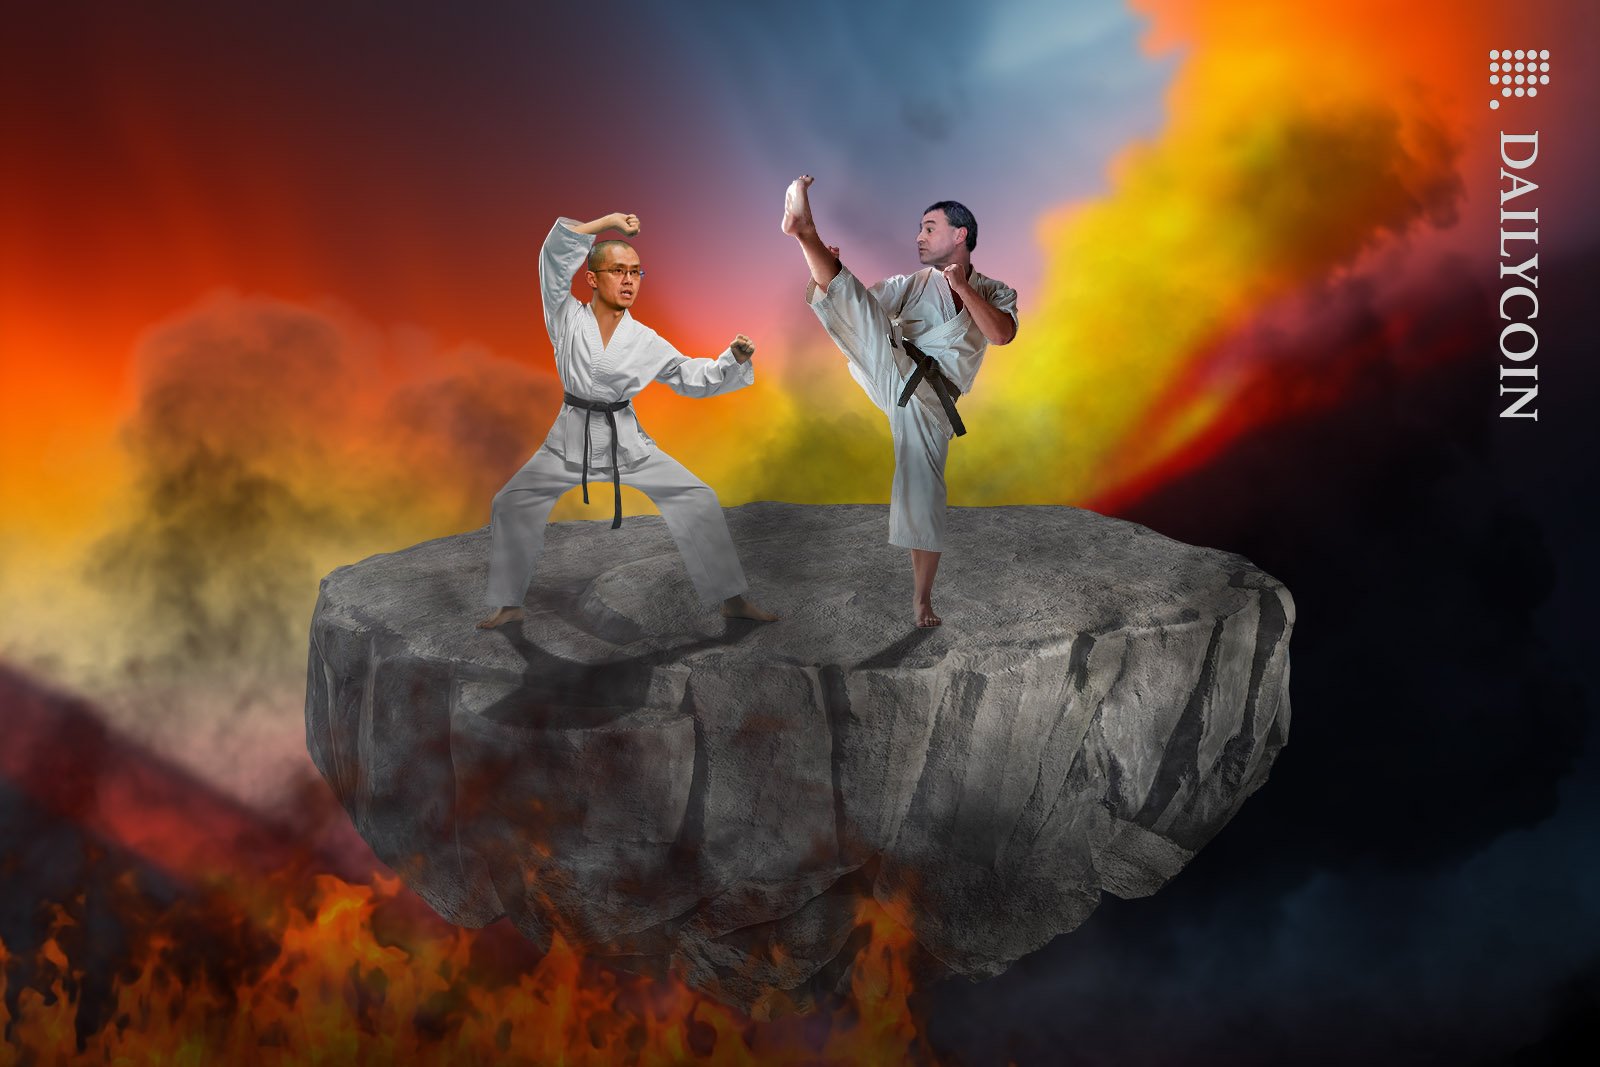 Changpeng Zhao and Stephen Ehrlich having a karate fight on a floating bolder, surrounded by fire and smoke.